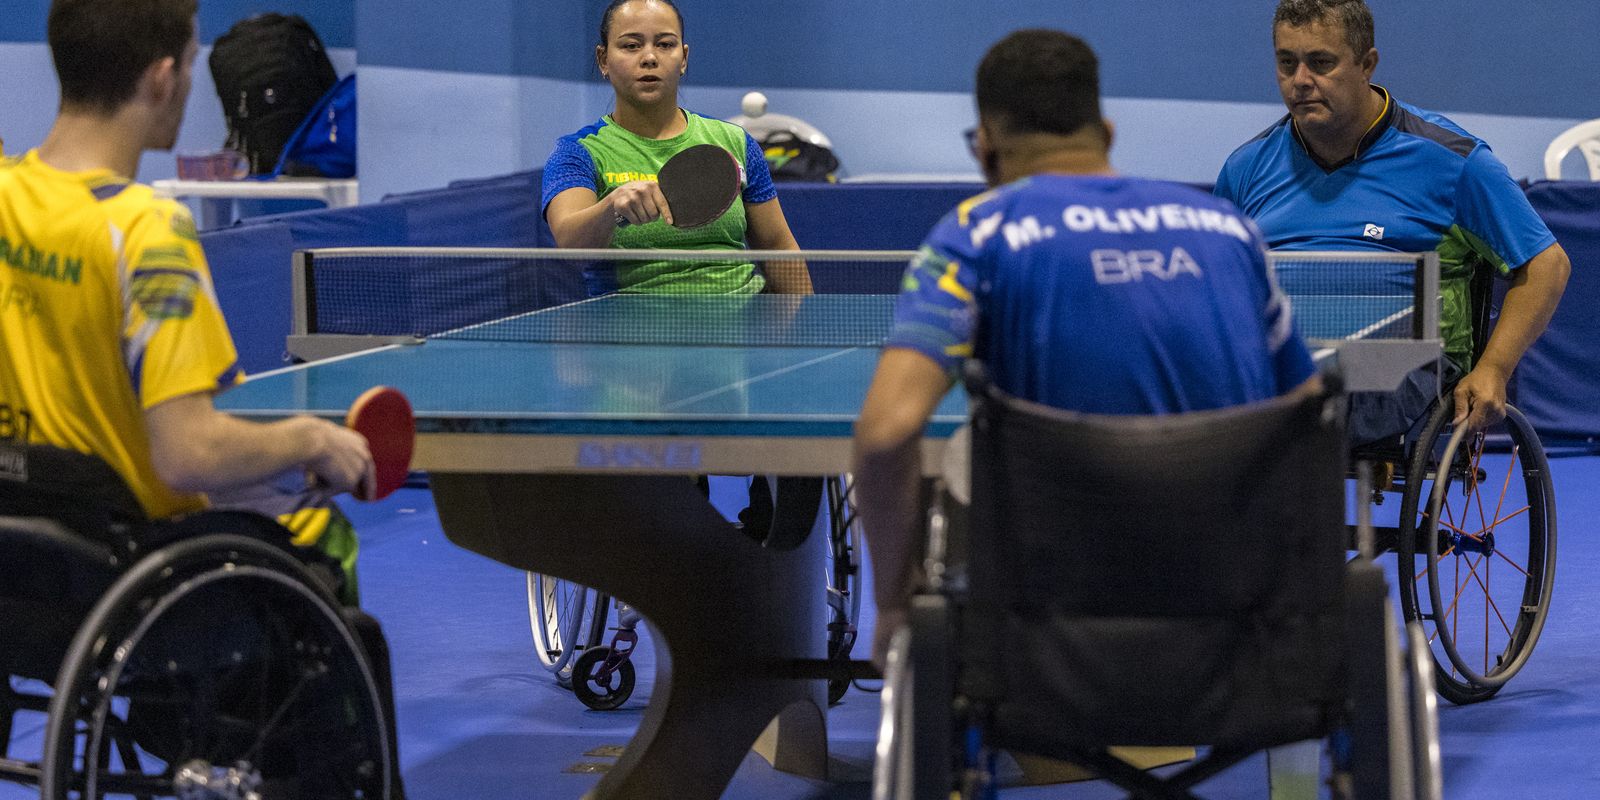 Parapan: table tennis starts before the opening ceremony